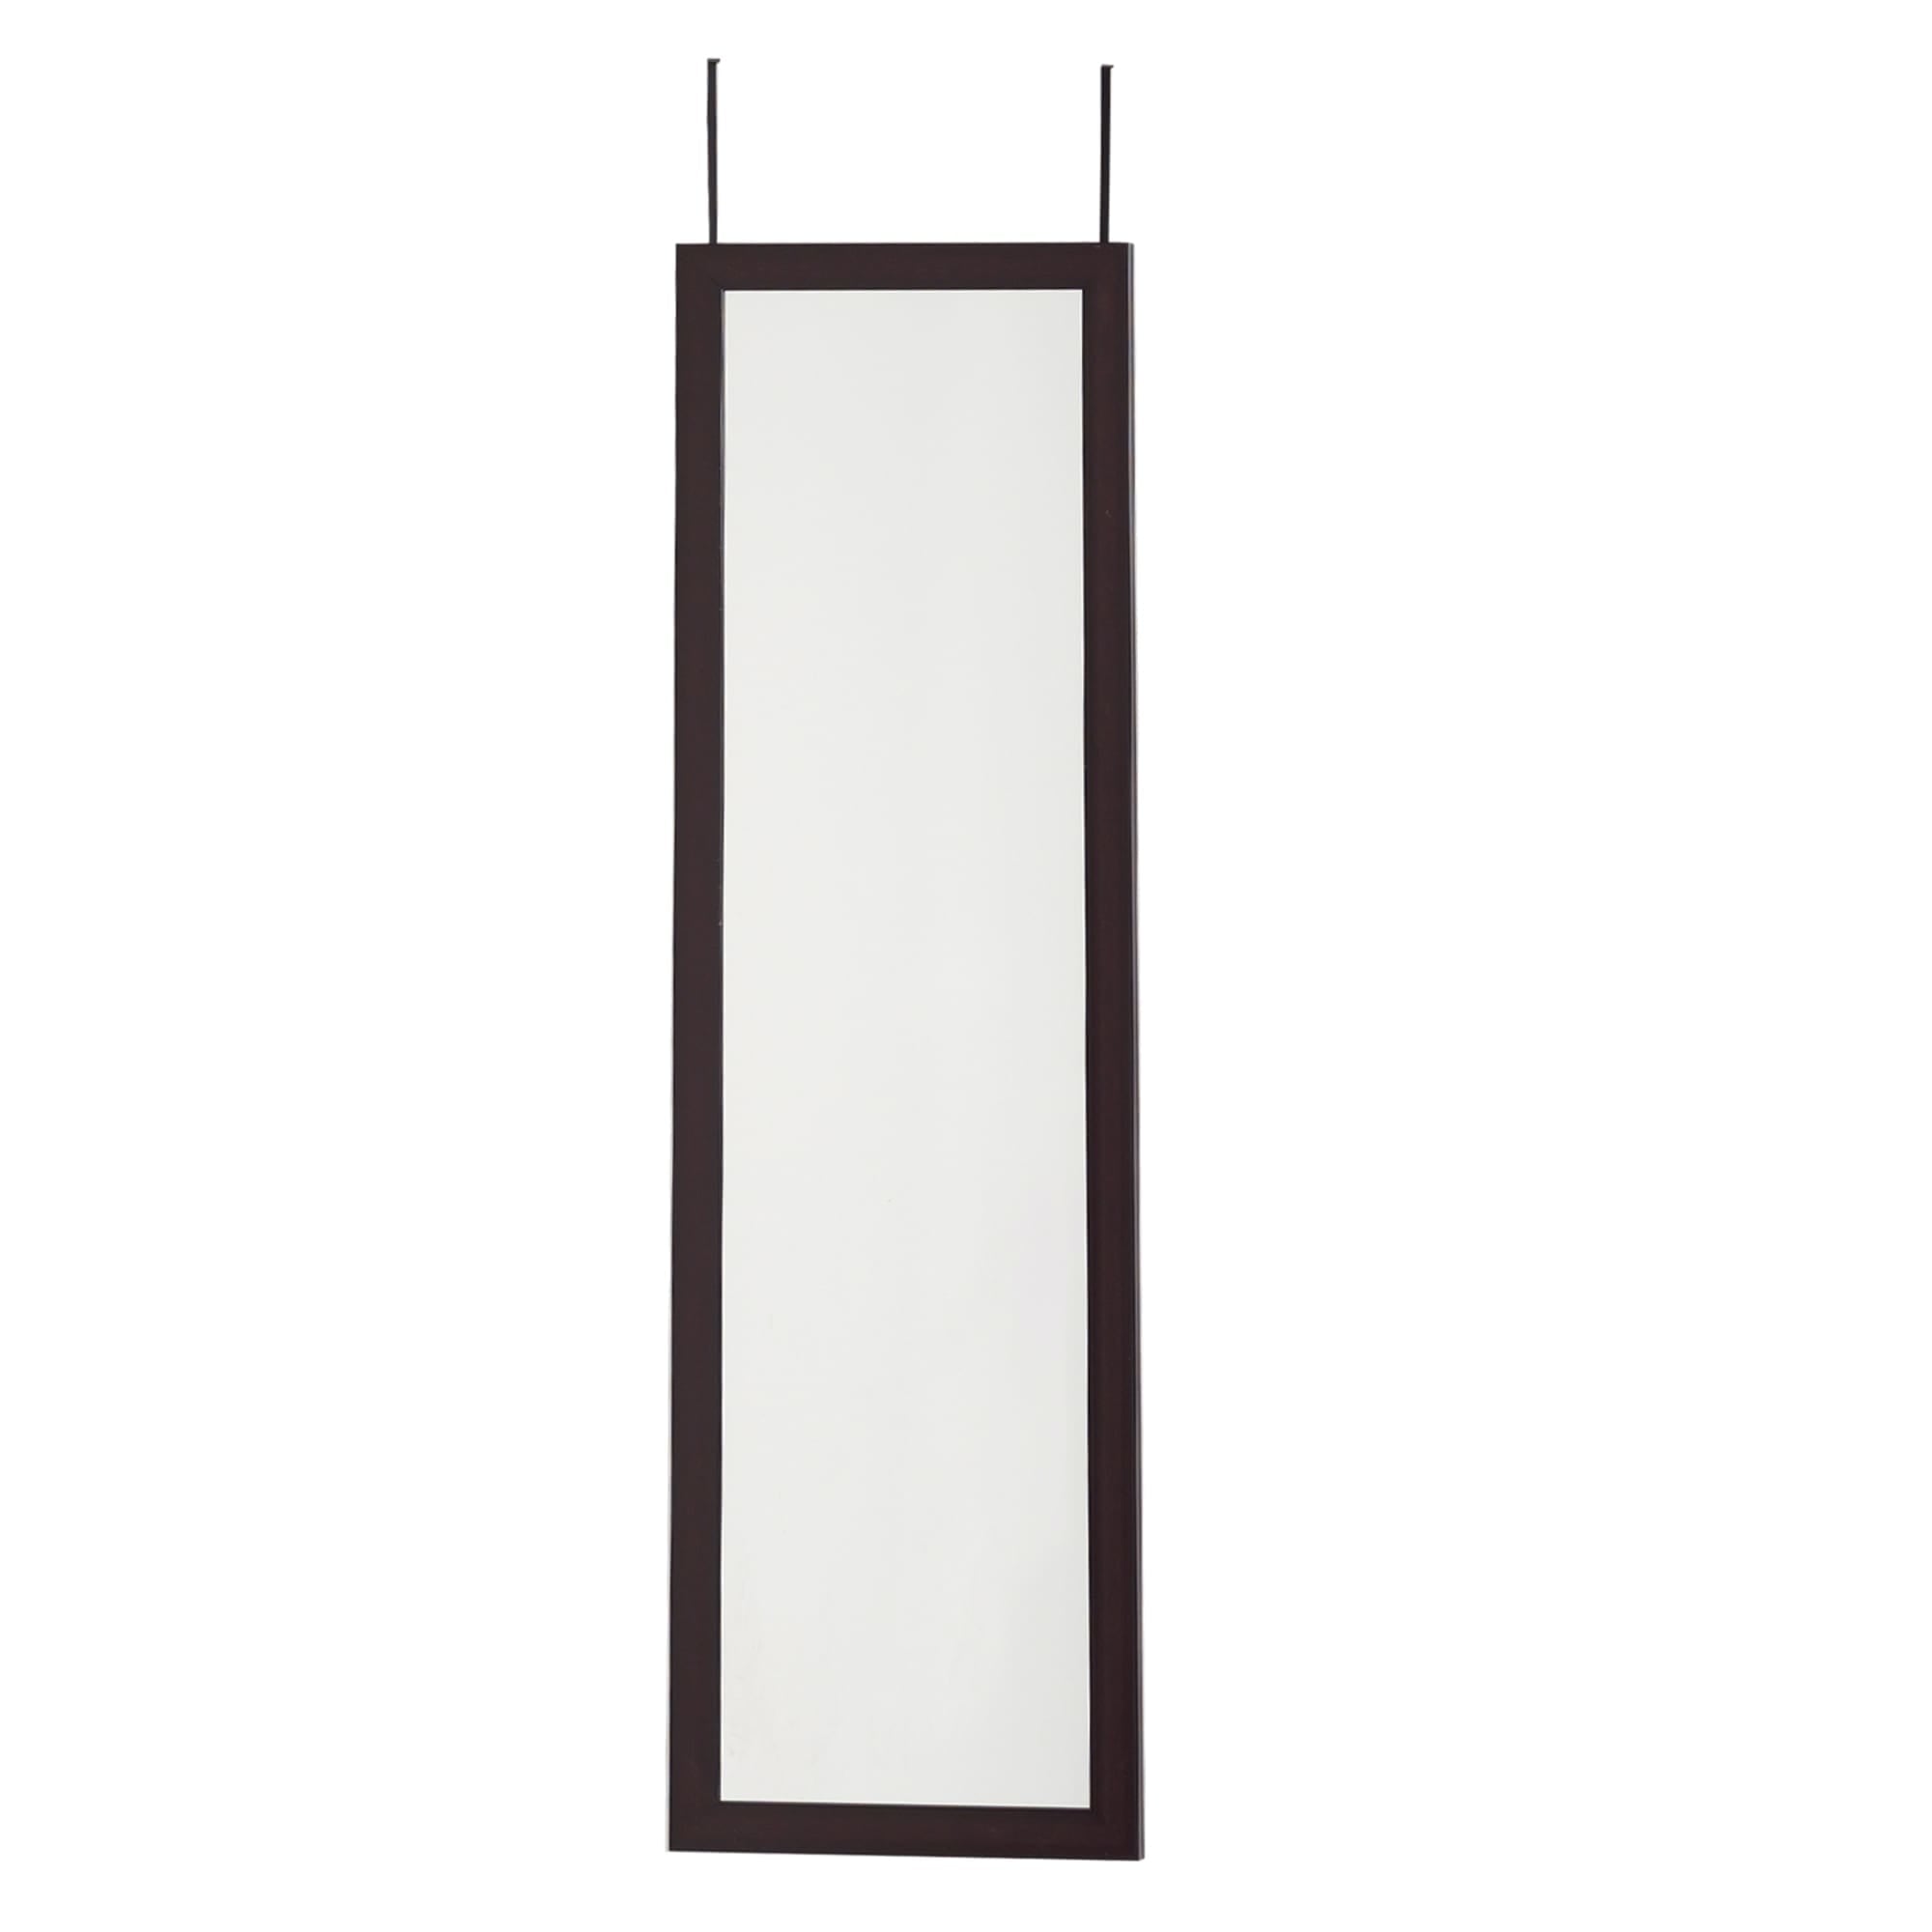 Home Basics Over The Door Mirror, Mahogany $12.00 EACH, CASE PACK OF 6